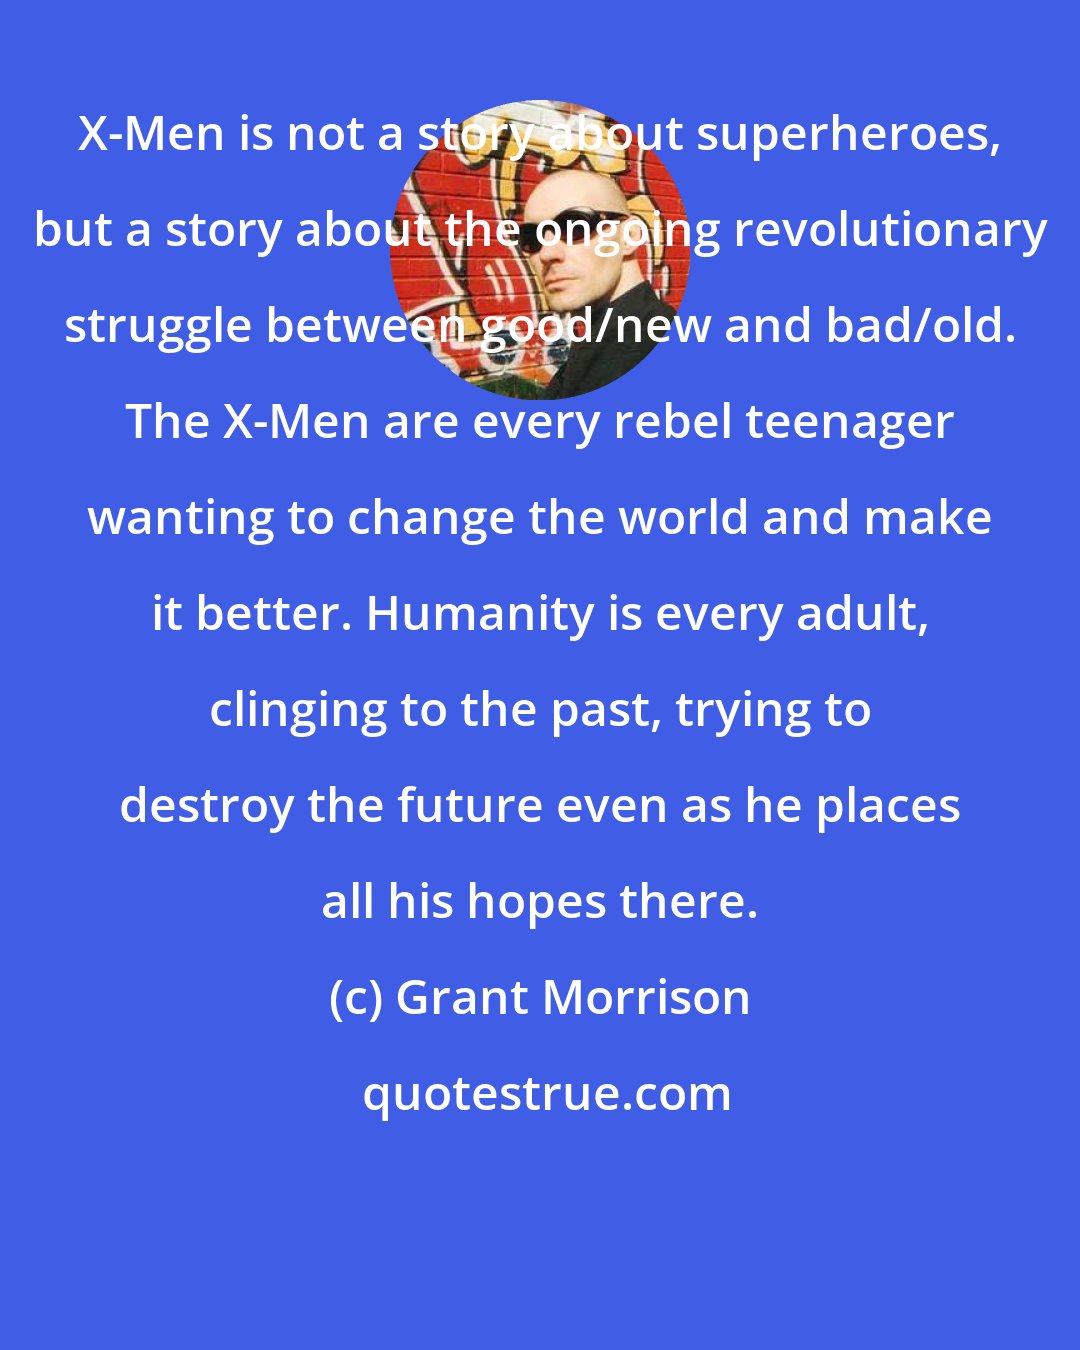 Grant Morrison: X-Men is not a story about superheroes, but a story about the ongoing revolutionary struggle between good/new and bad/old. The X-Men are every rebel teenager wanting to change the world and make it better. Humanity is every adult, clinging to the past, trying to destroy the future even as he places all his hopes there.